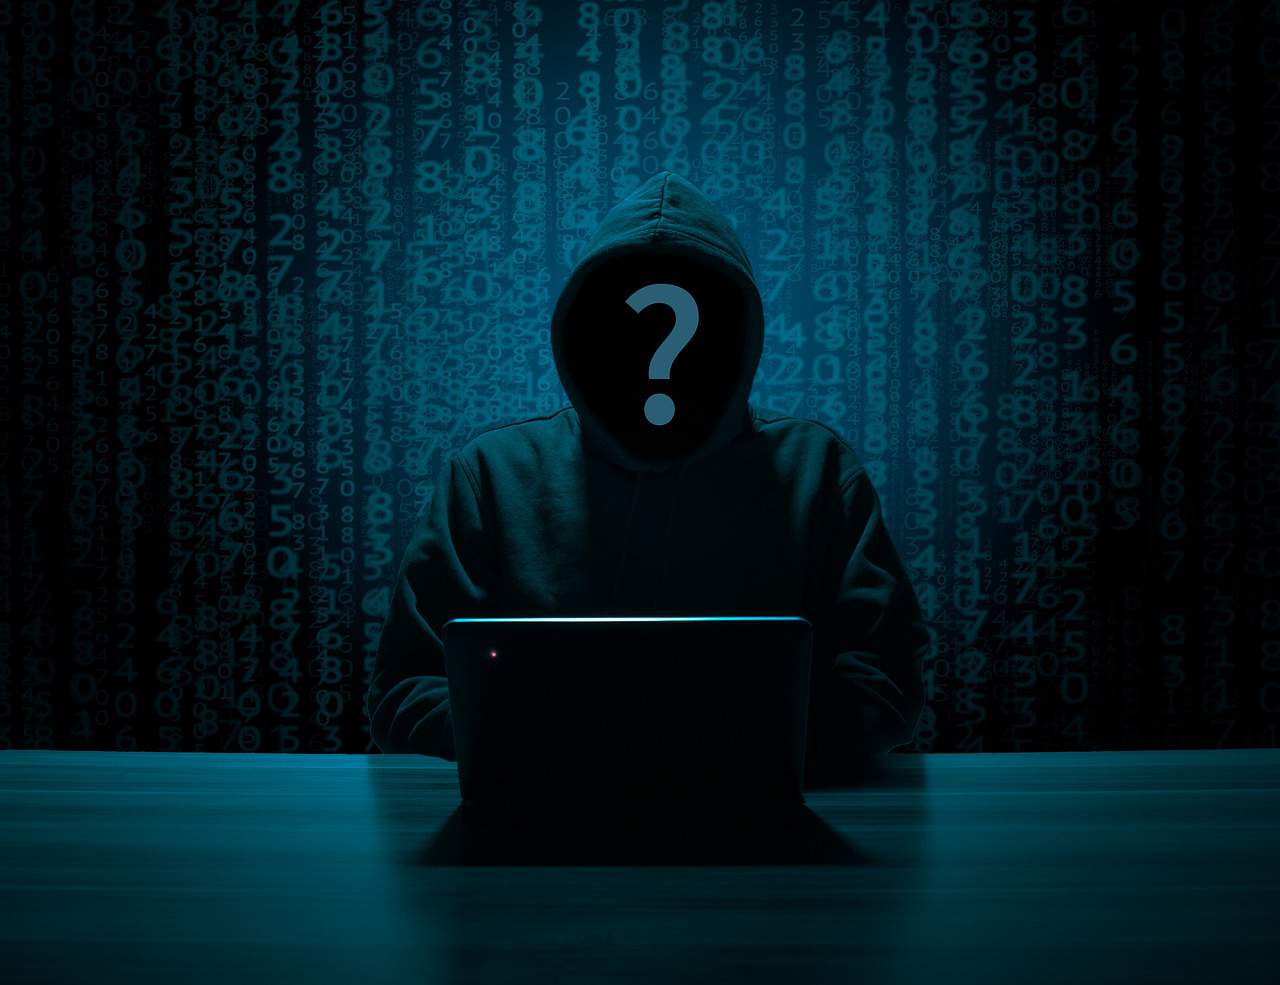 A person with a question mark face sits in front of a laptop with numbers in the background. 